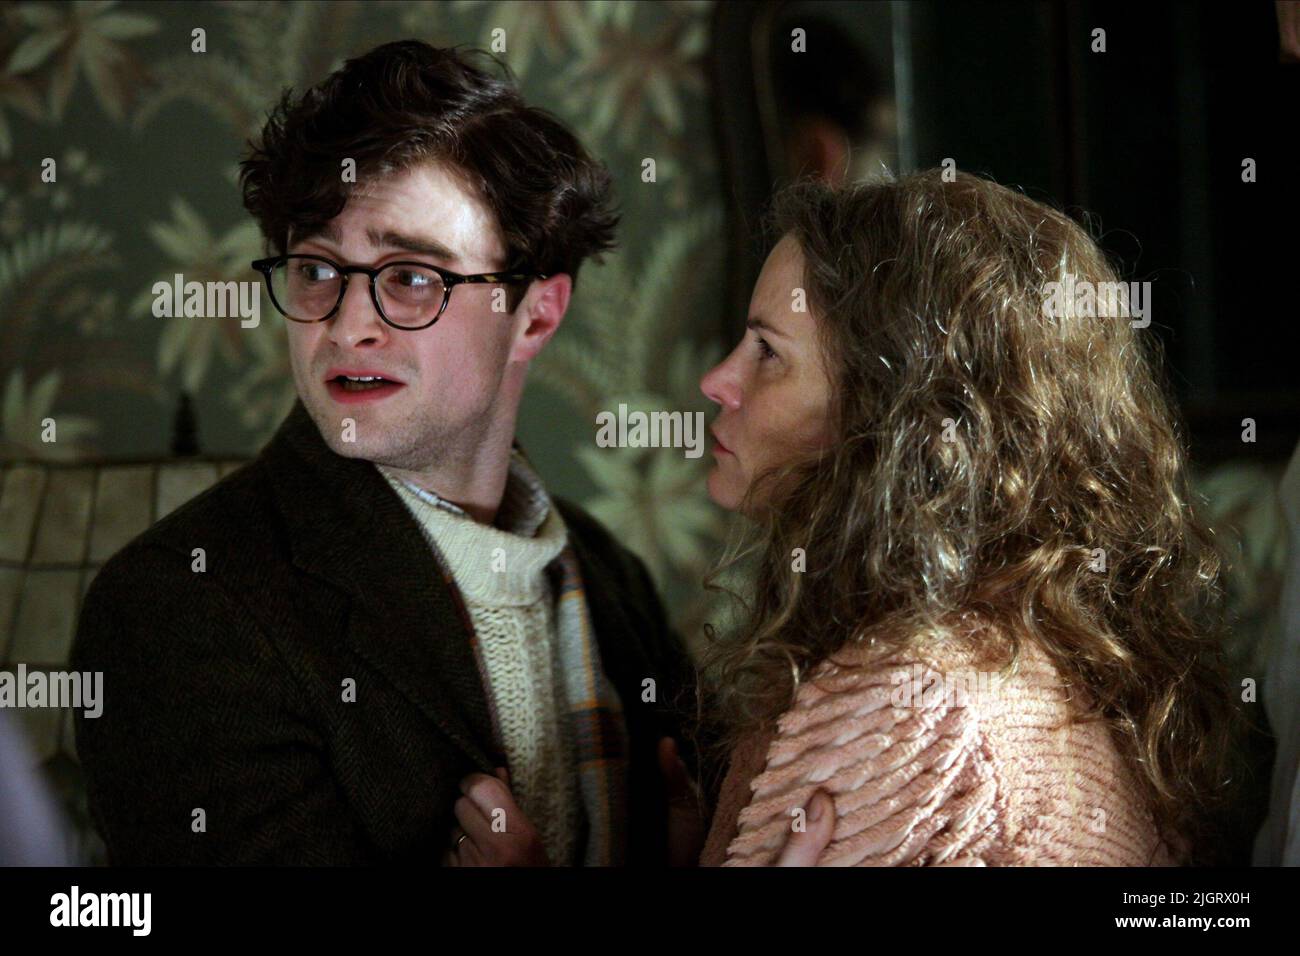 RADCLIFFE, LEIGH, KILL YOUR DARLINGS, 2013 Stockfoto